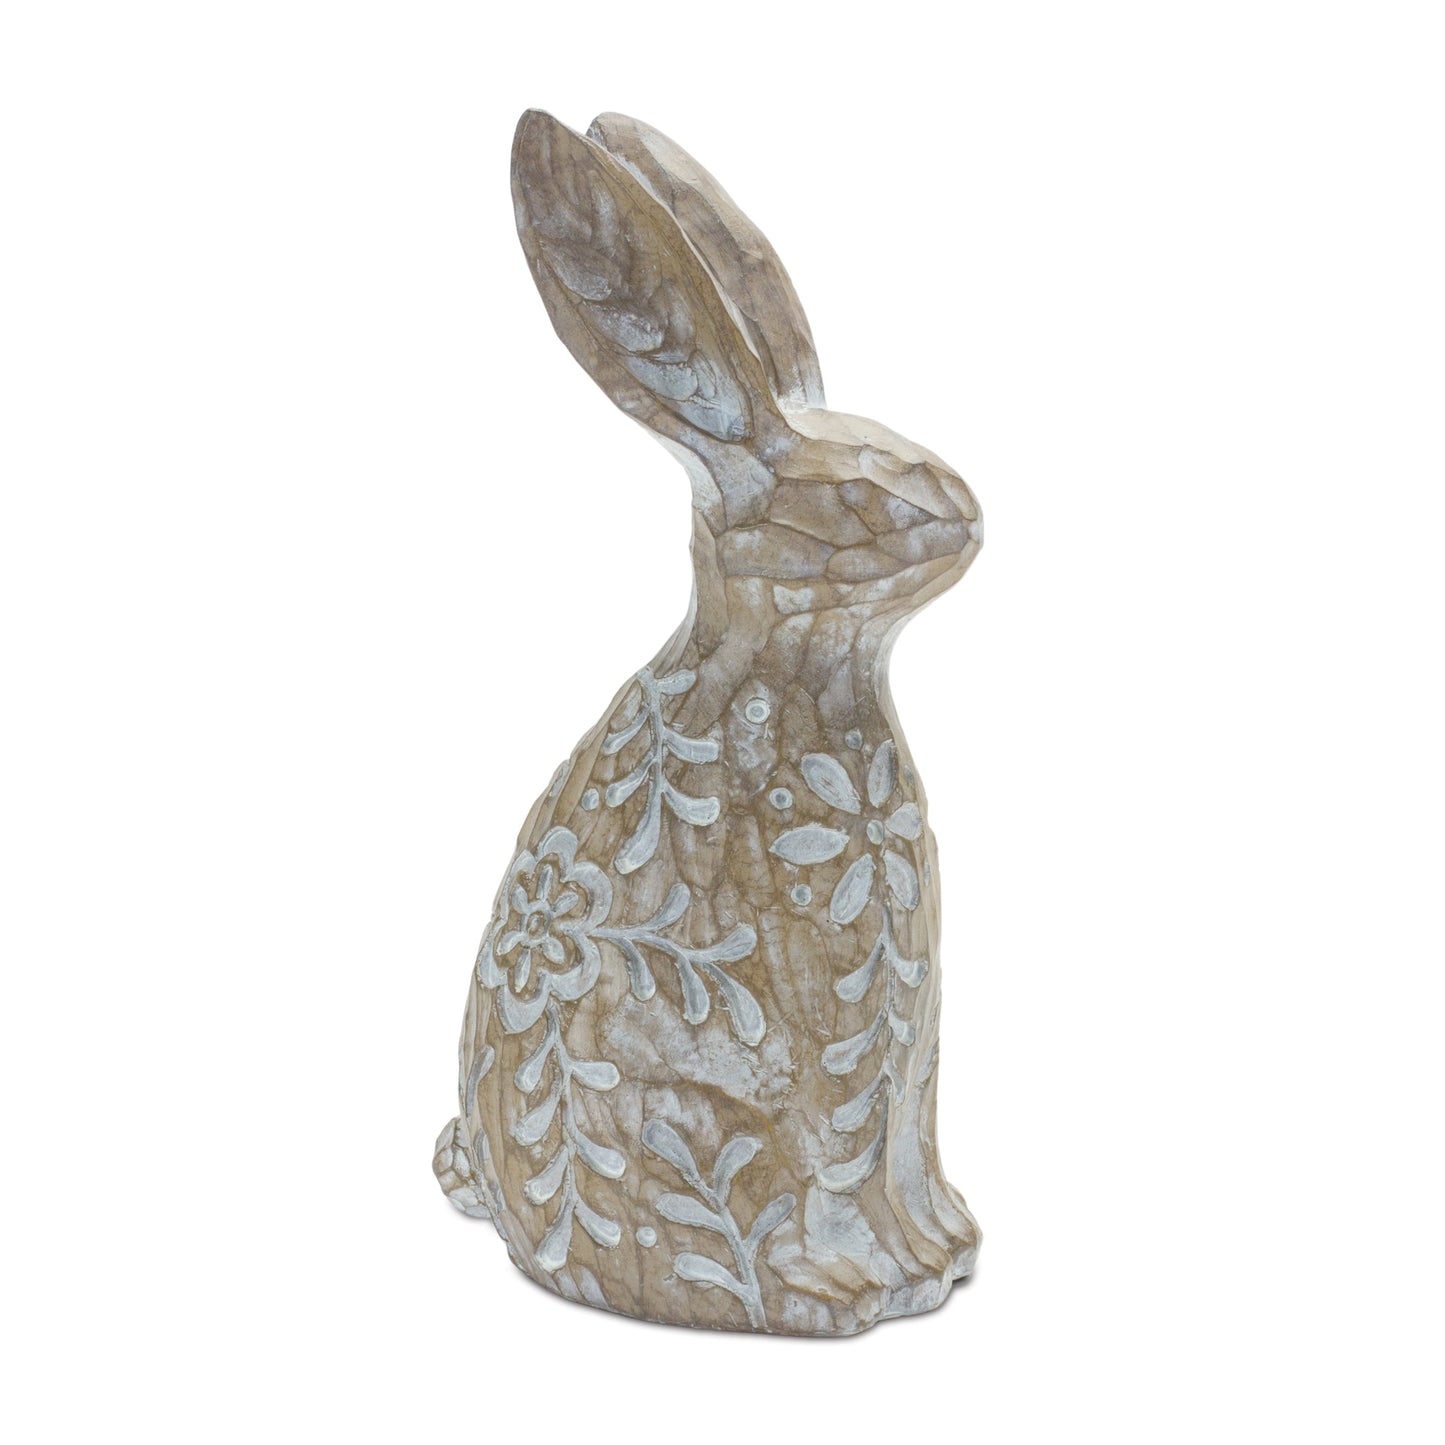 Carved Bunnies - Set of 2